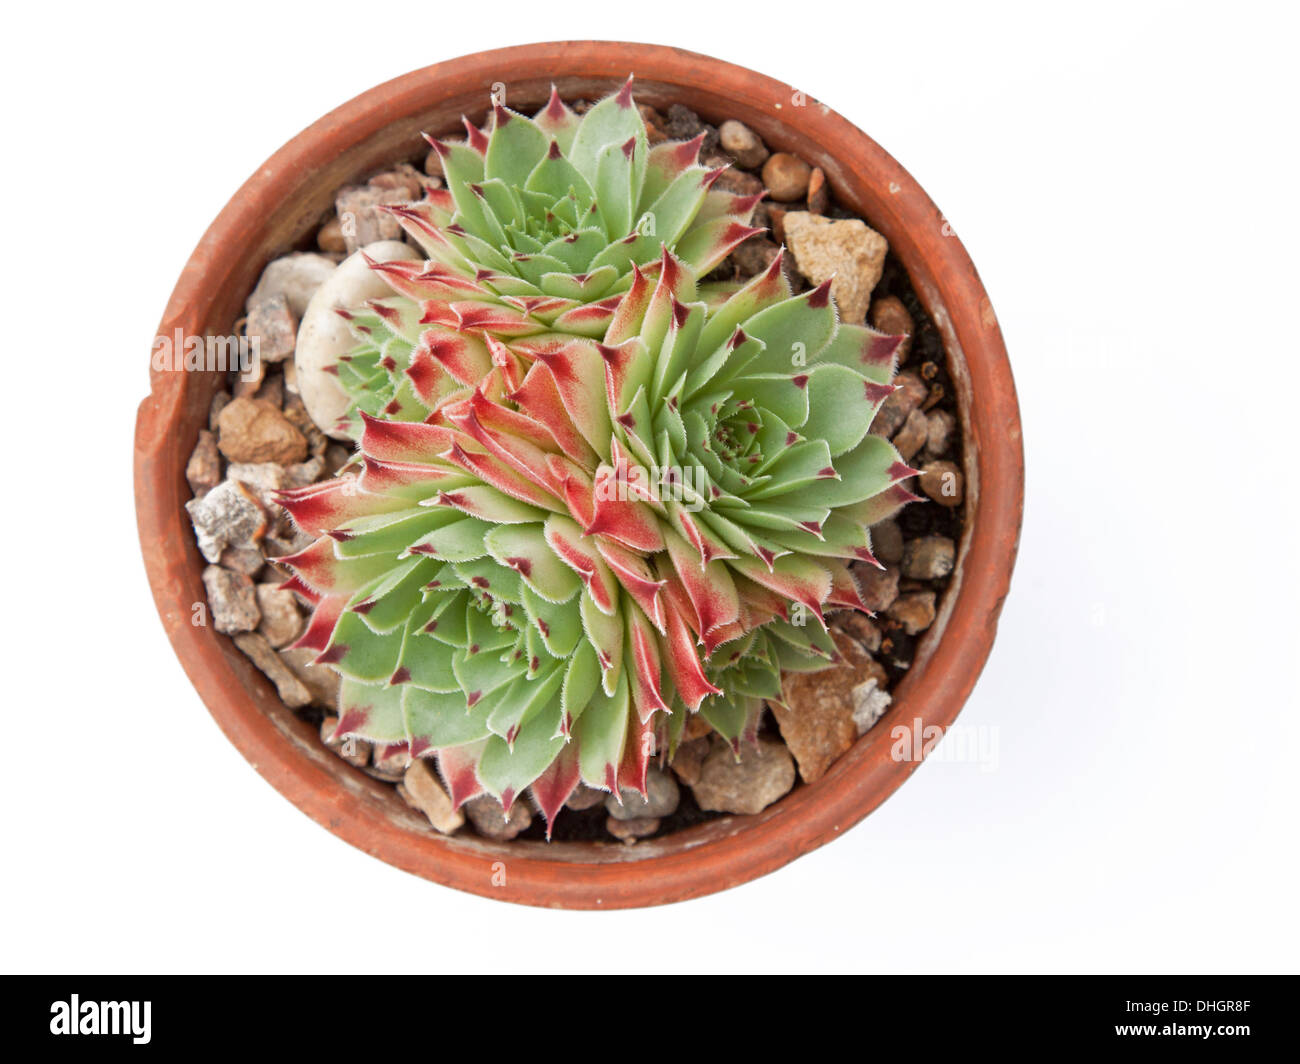 Young succulent plats (Jovibarba hirta) in a terracotta pot against a white background Stock Photo